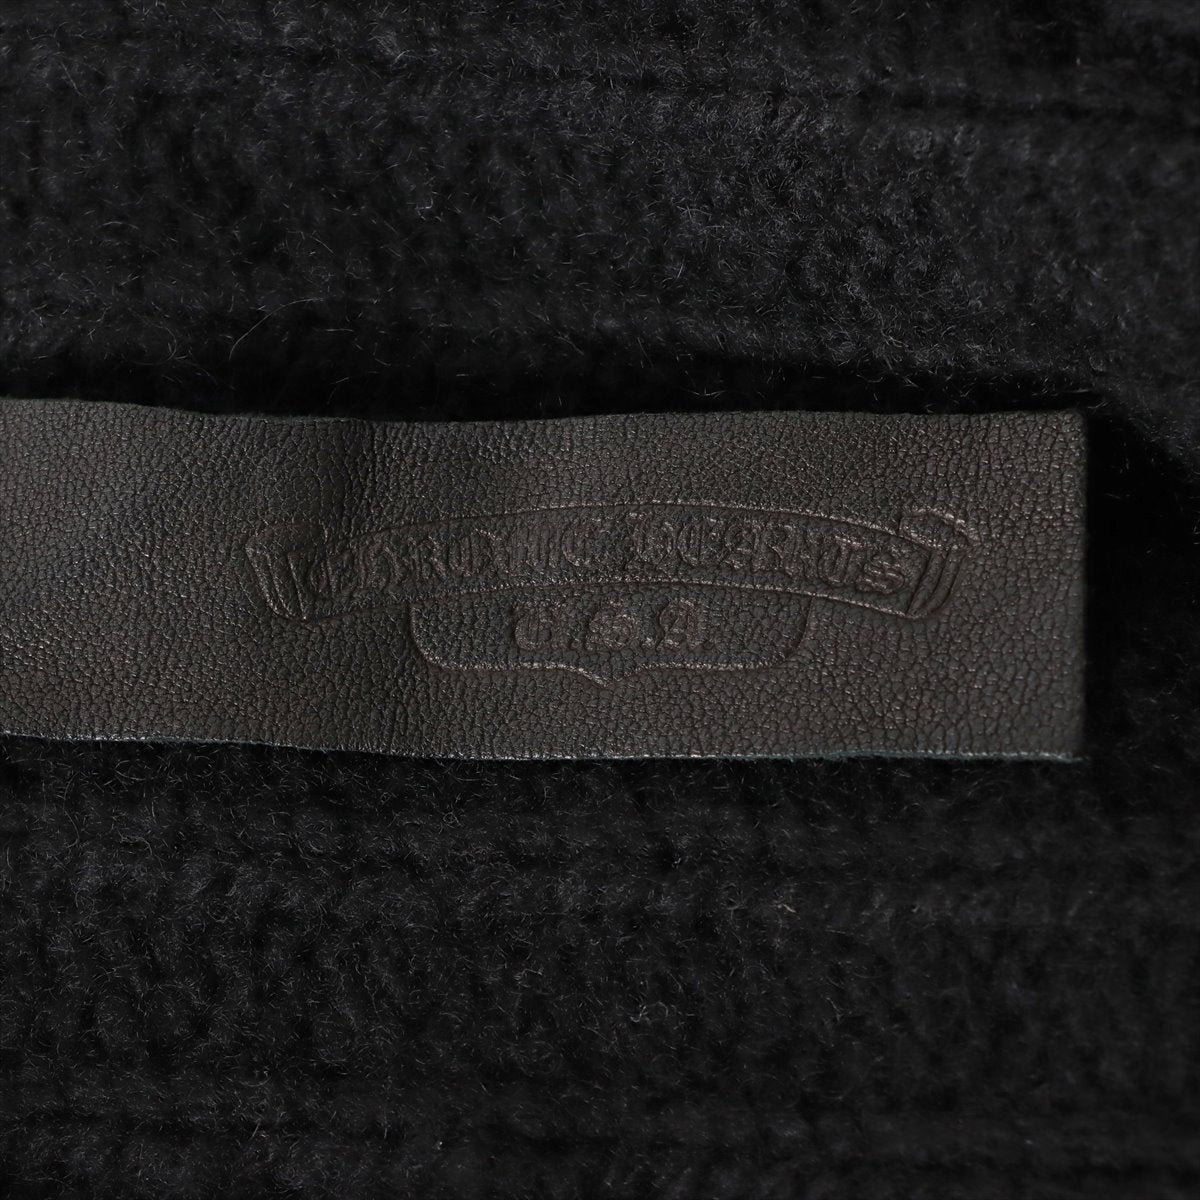 Chrome Hearts Parker Cashmere Black L Cross Patch Cross button knitted hoodie